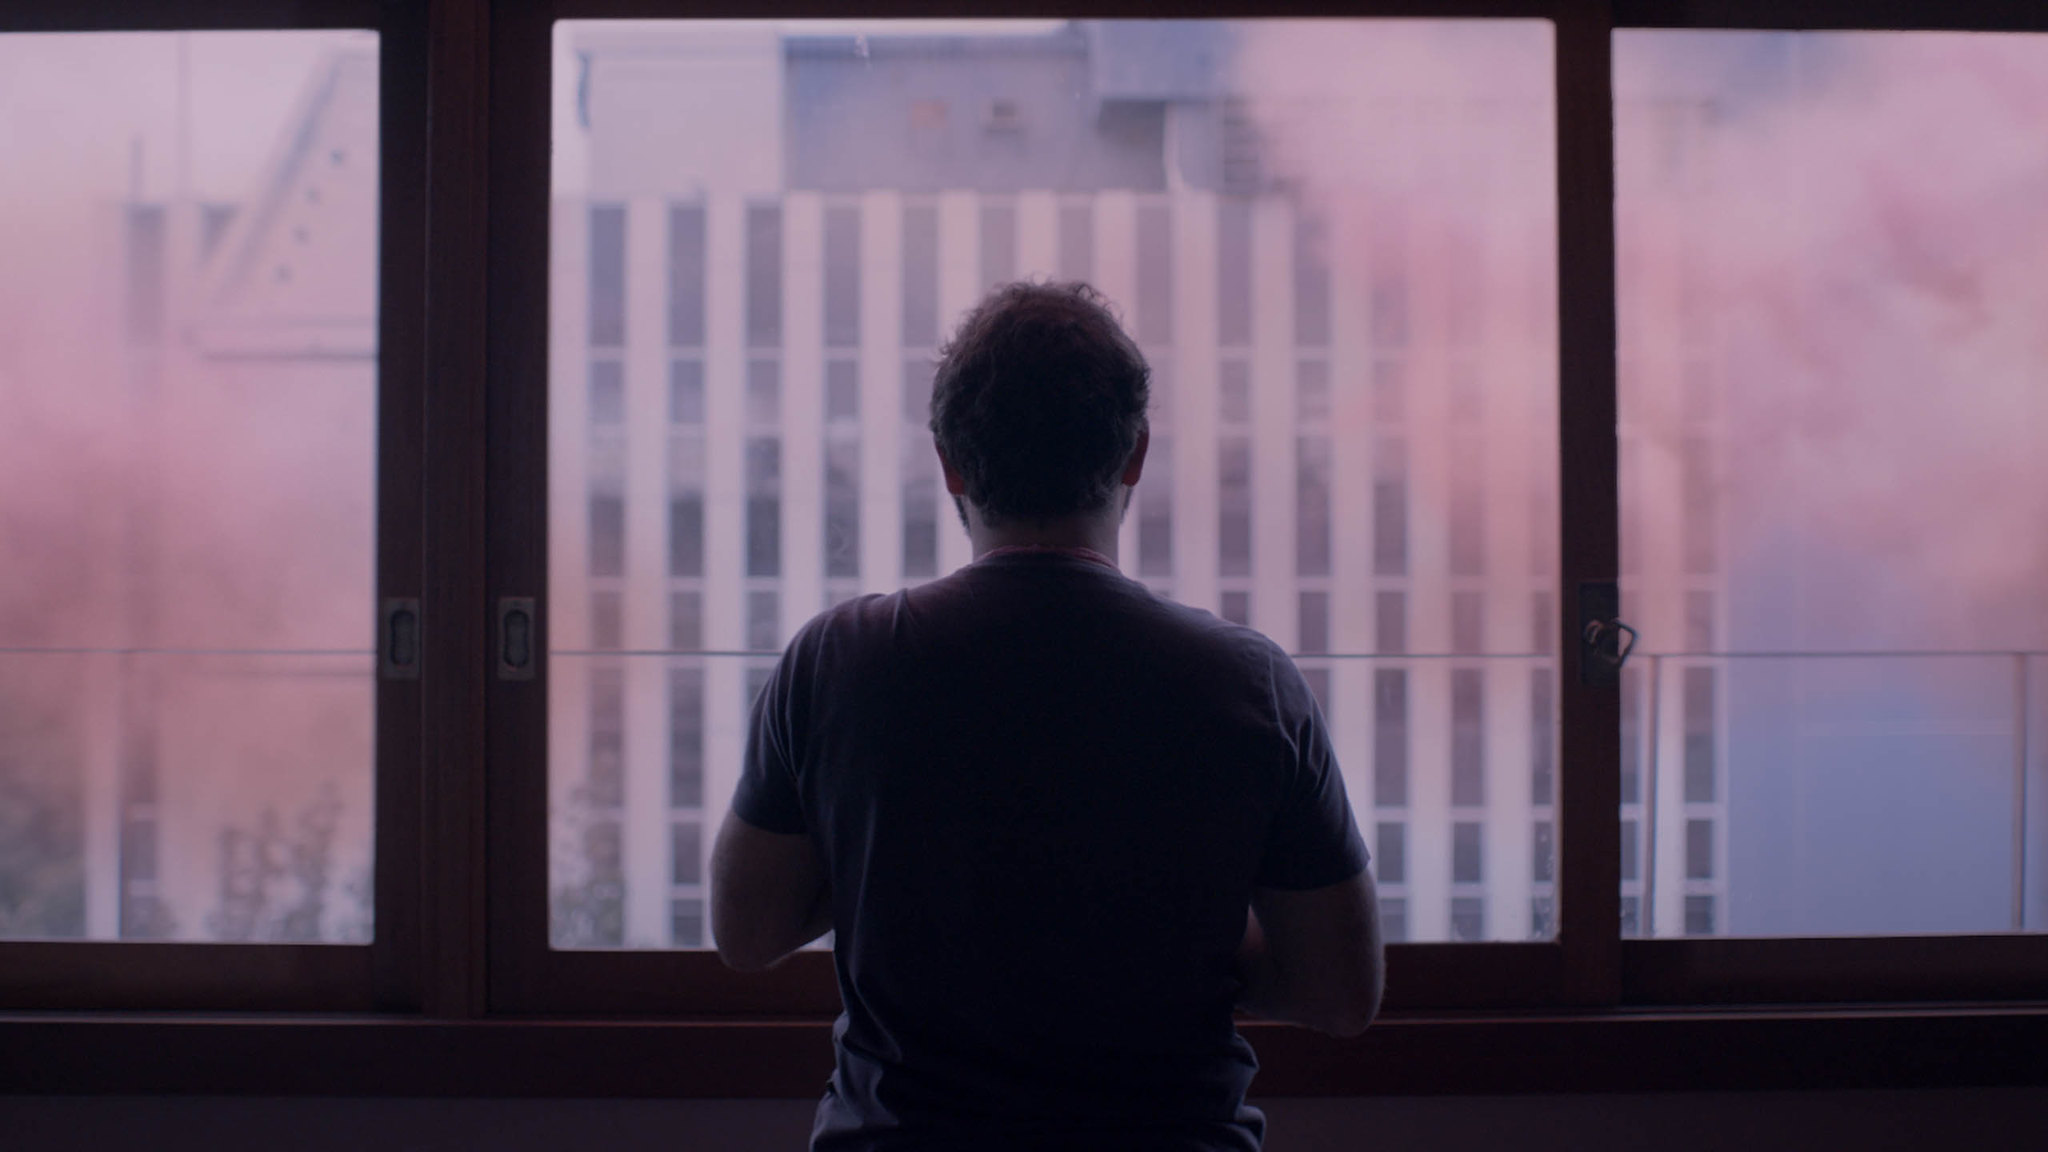 A man stands in front of a window, looking at a hazy pink cloud outside.